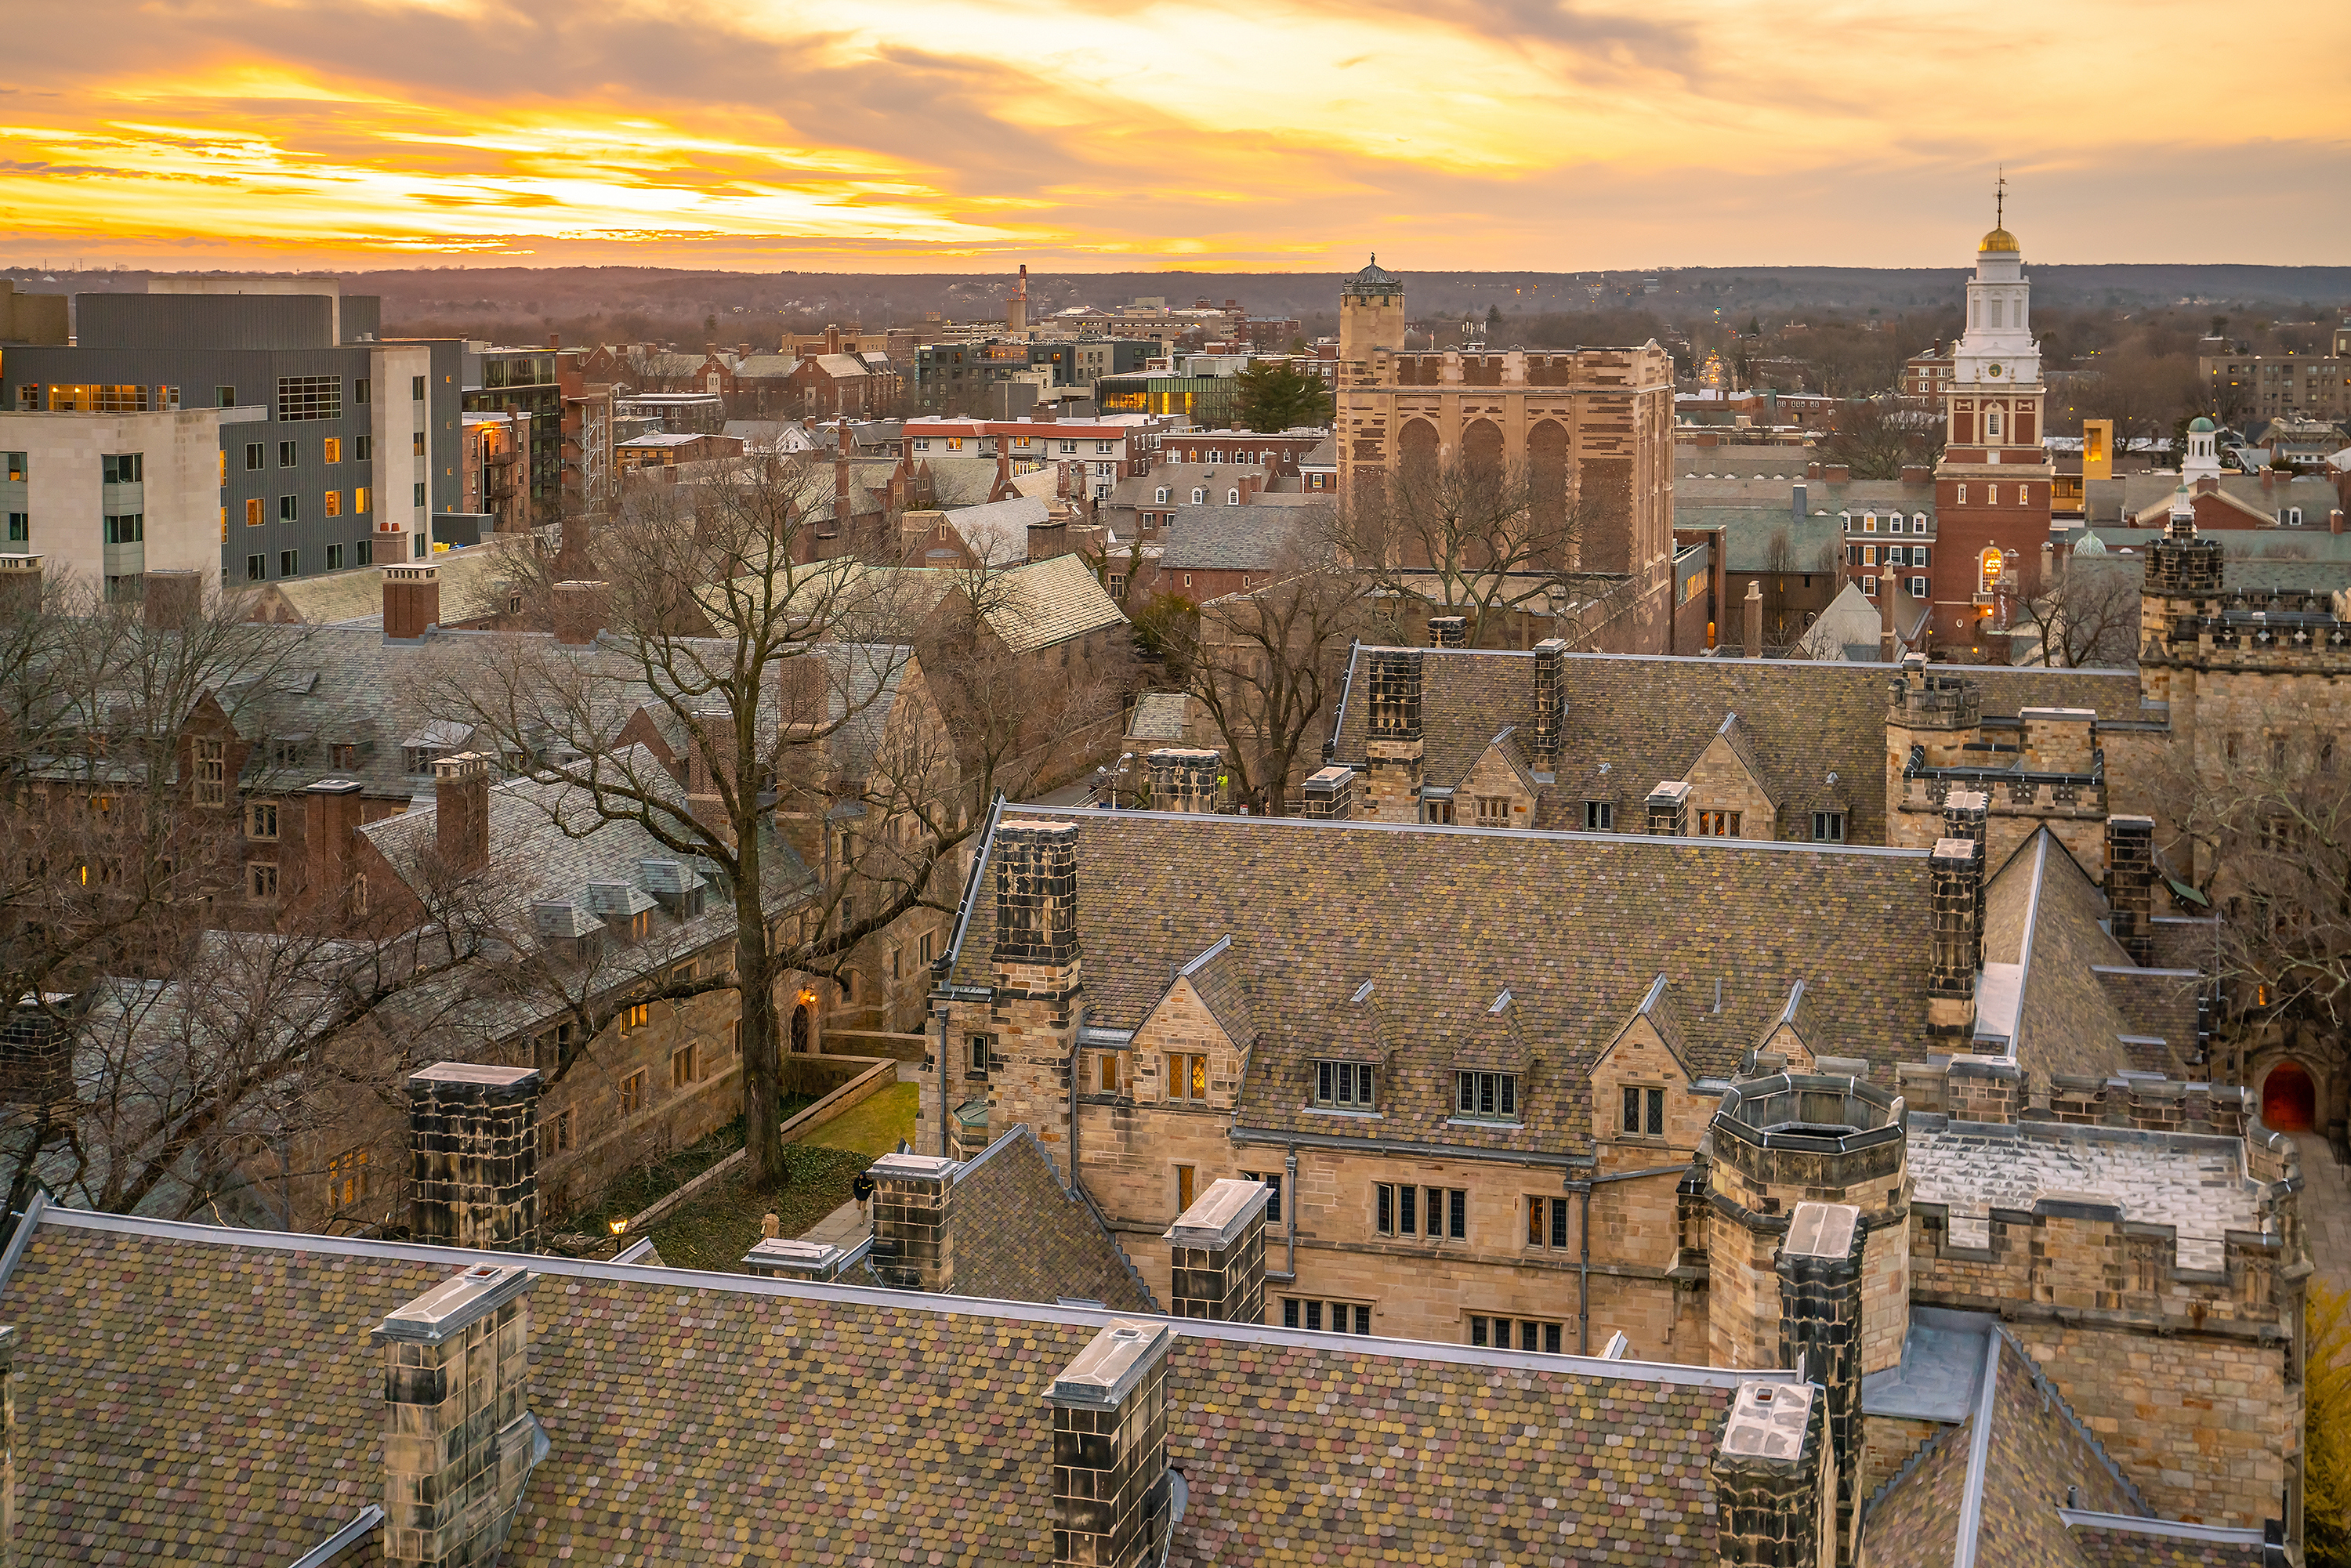 NEWSLINE: Jewish student speaks out after being assaulted at Yale protest